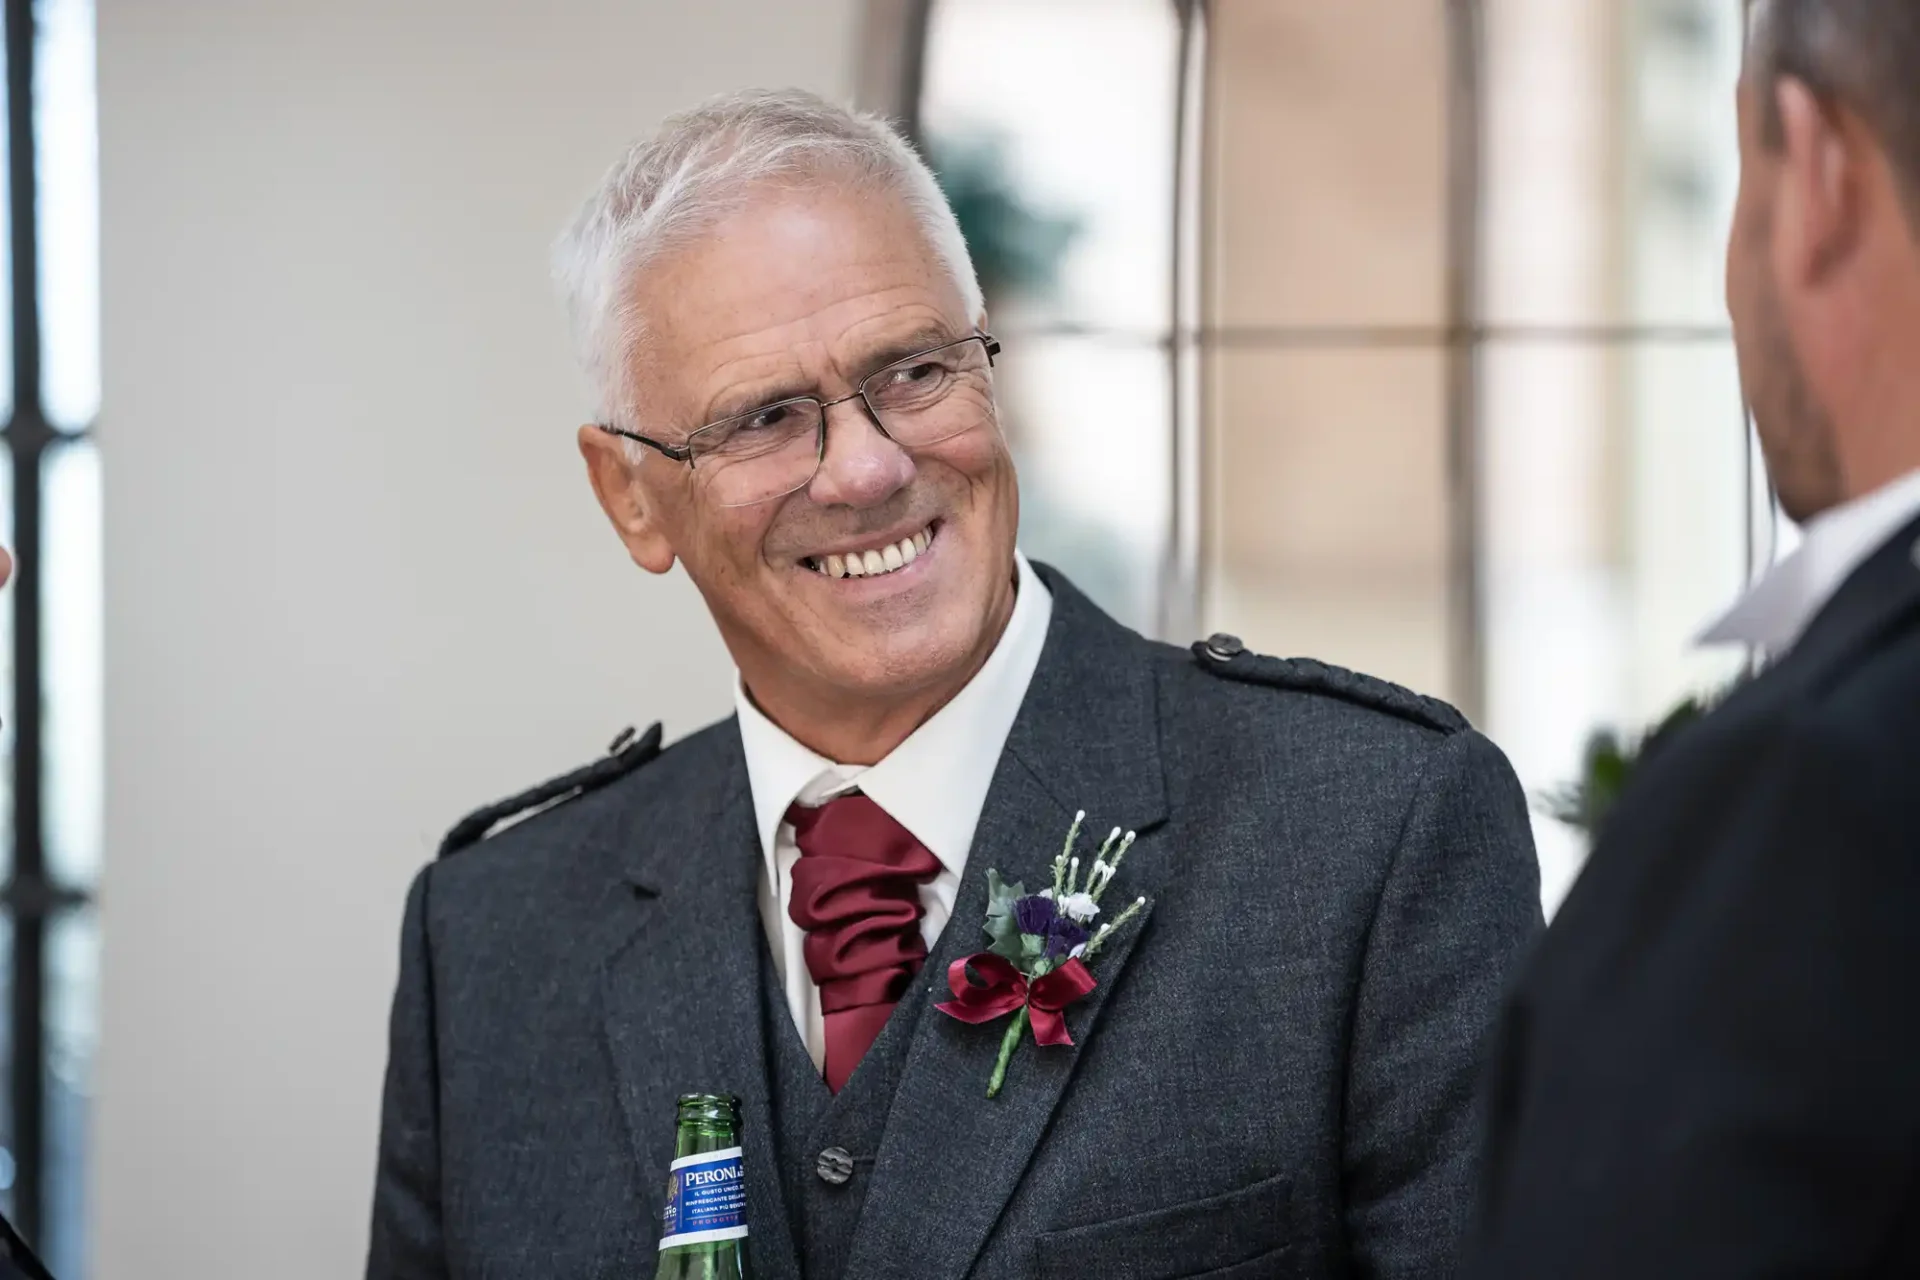 An older man in a gray suit, smiling, with a red flower boutonniere, holding a green bottle, talking to another person out of view.